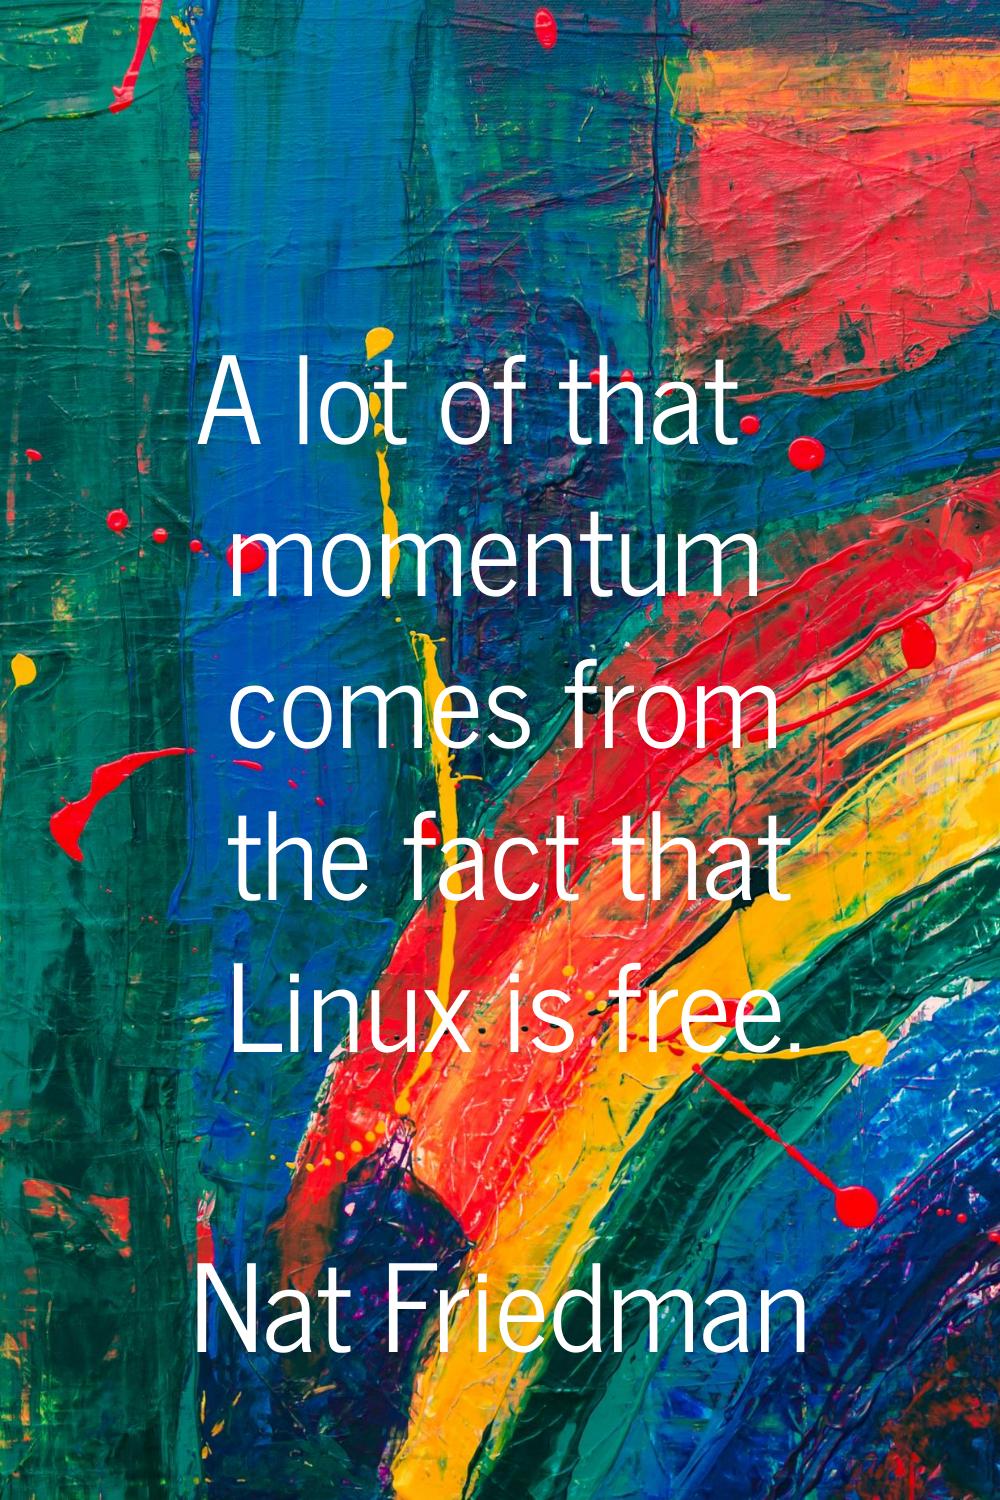 A lot of that momentum comes from the fact that Linux is free.